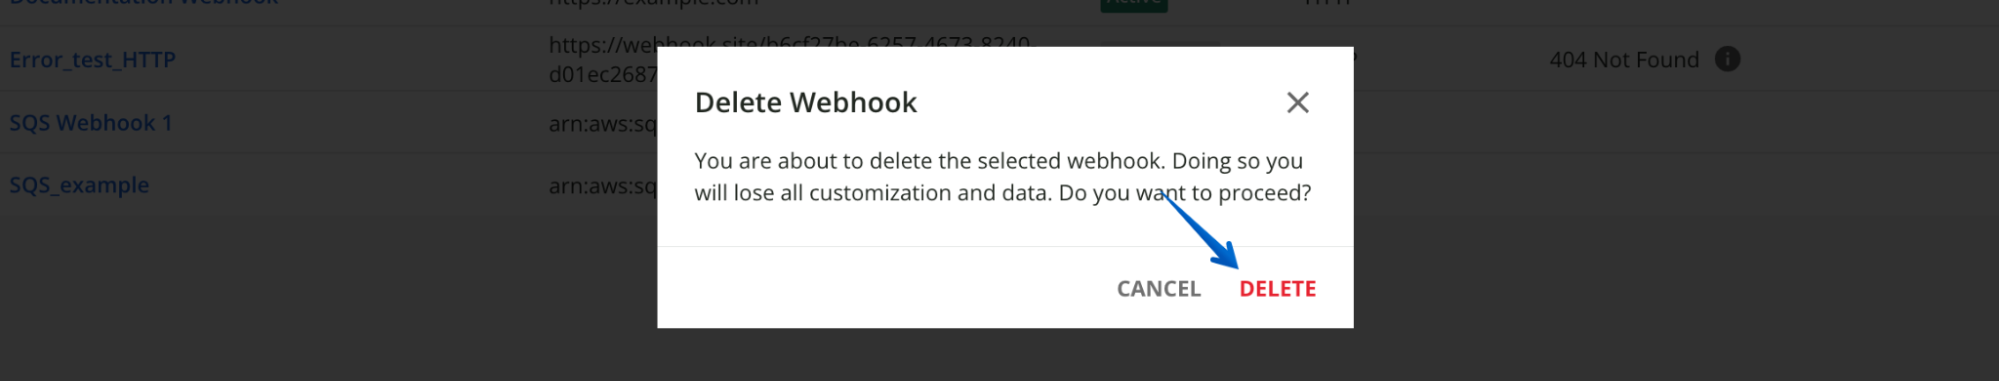 Pressing Delete in the resulting modal window to confirm the deletion